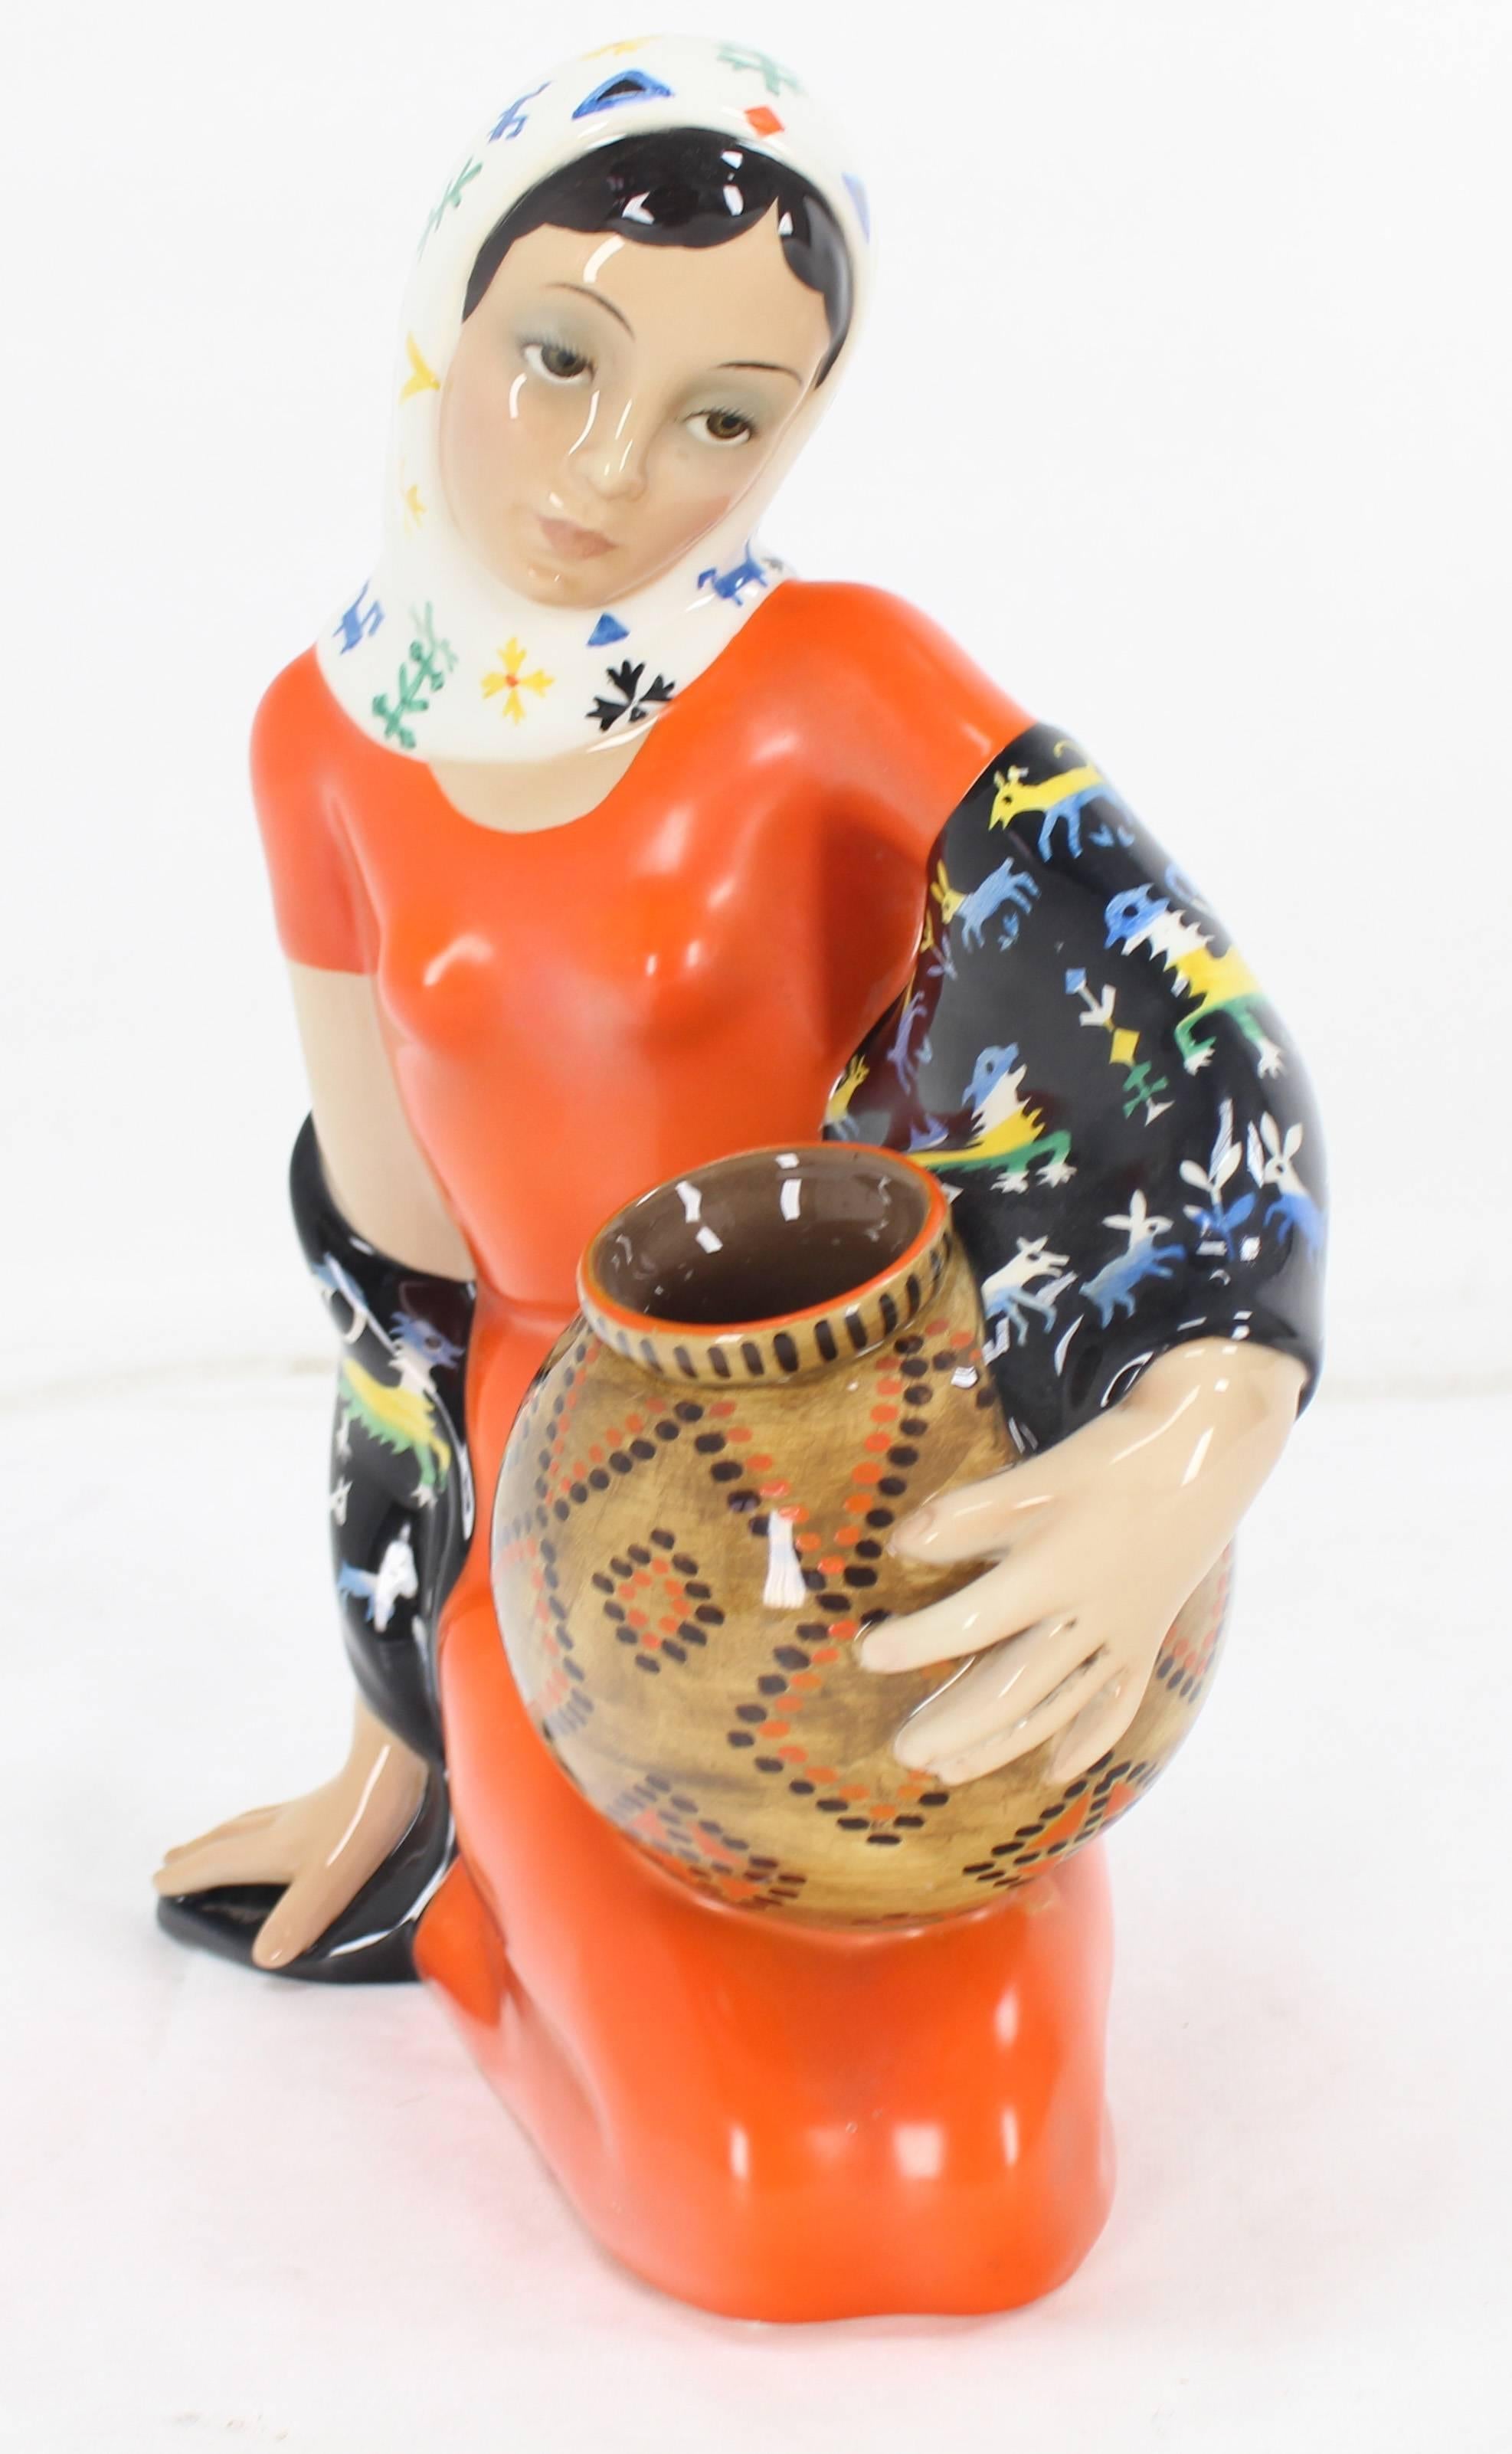 Italian porcelain figurine of a young girl in red dress holding a basket or vase from Lenci Torino, Italy.